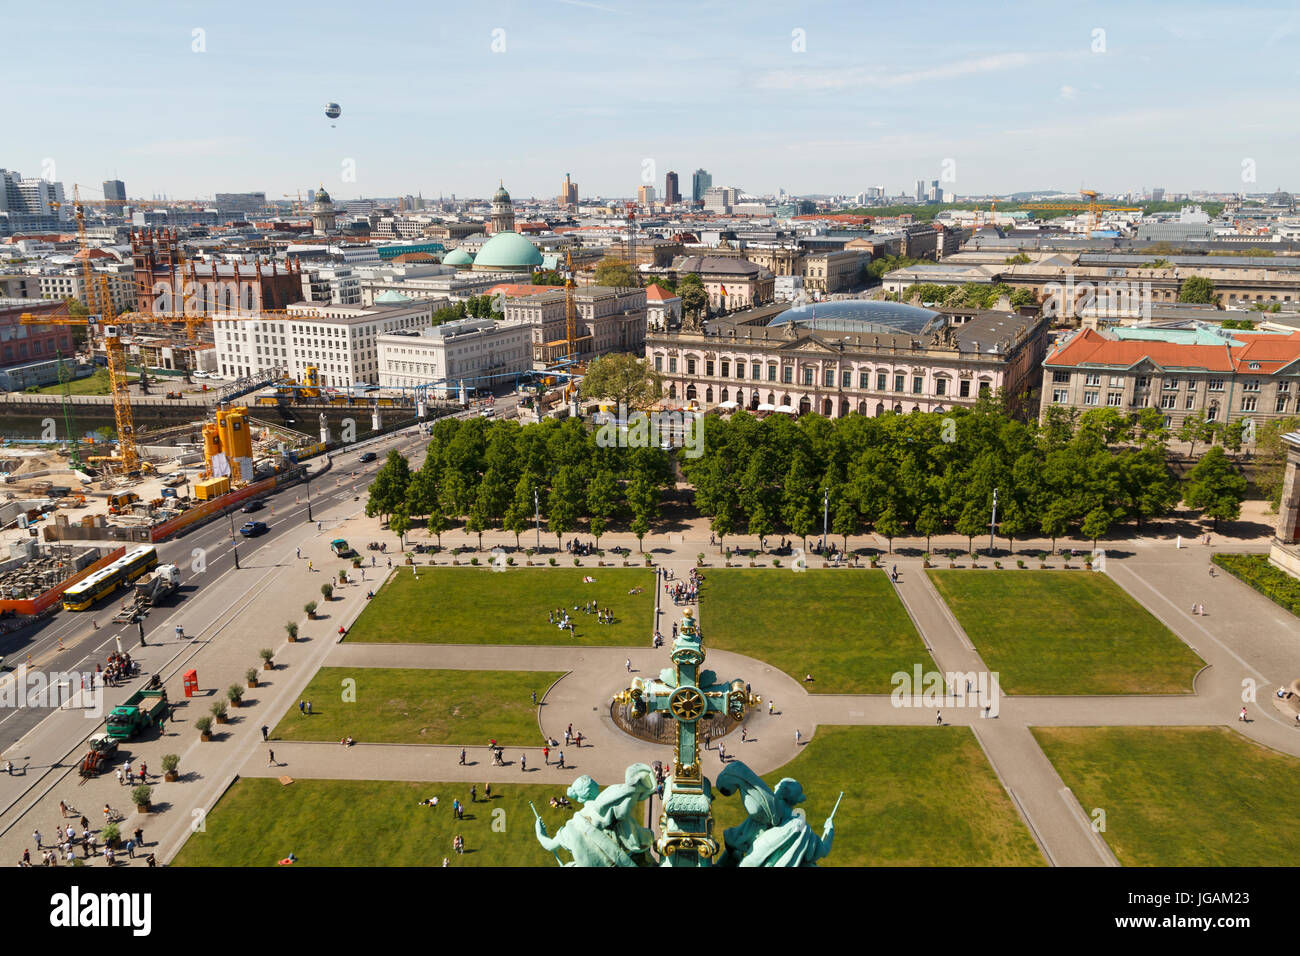 City view of Berlin from the roof of the Catheral Dome, with hot air ballon in the sky Stock Photo